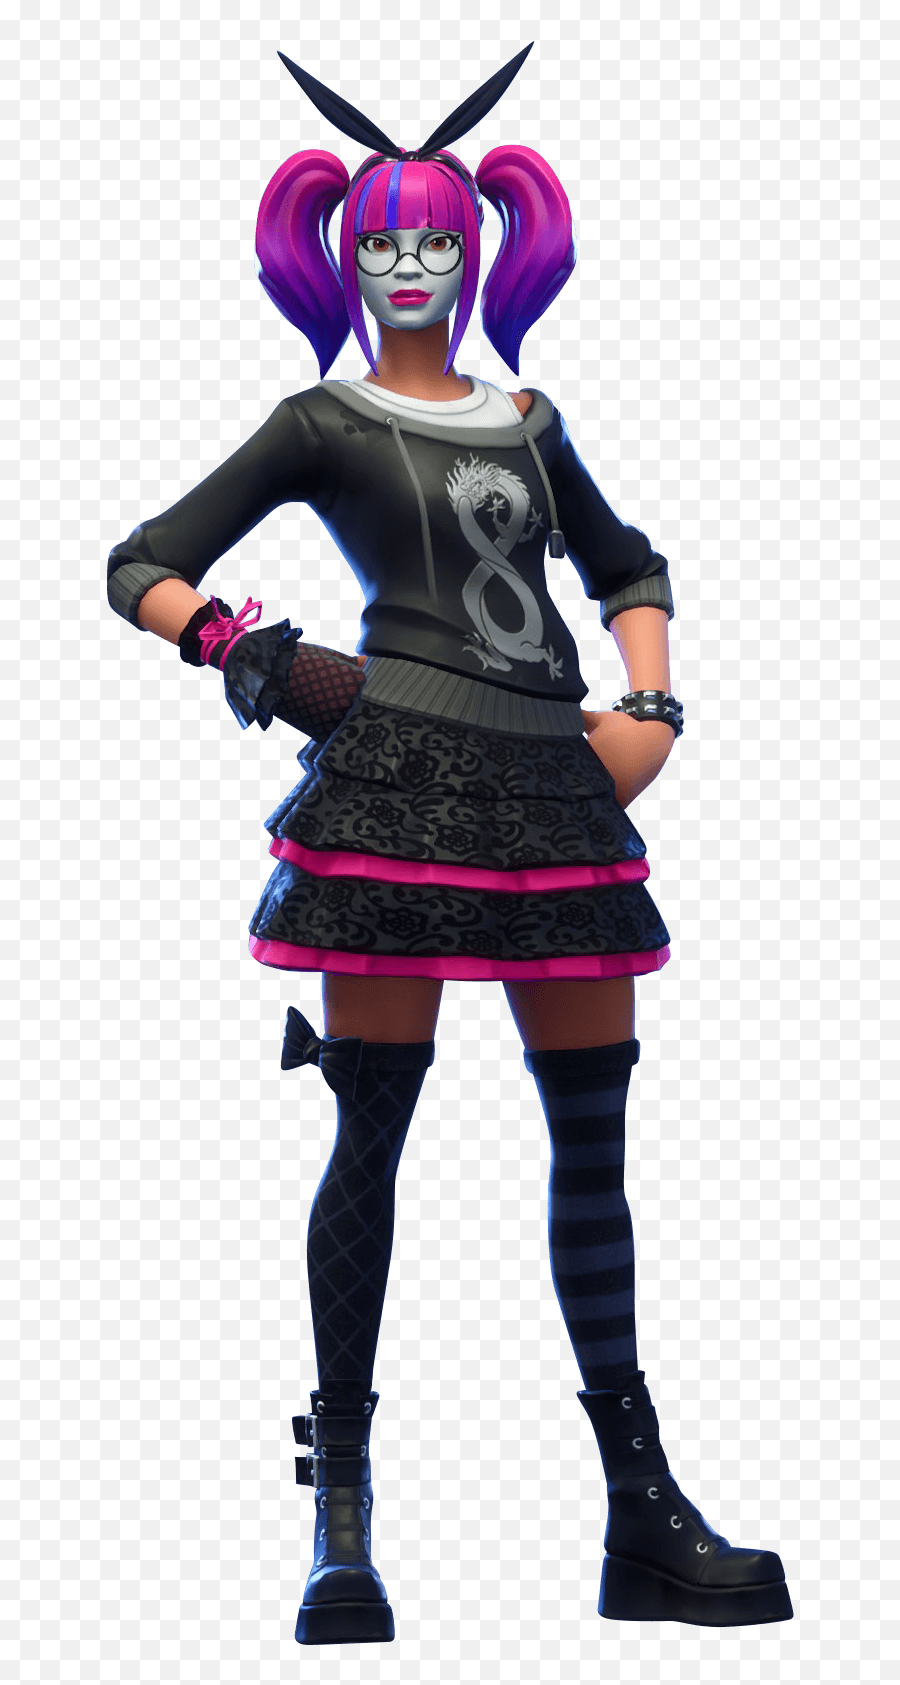 Fortnite Lace Skin Epic Outfit - Fortnite Skins Lace Skin Fortnite Transparent Background Png,Lace Png